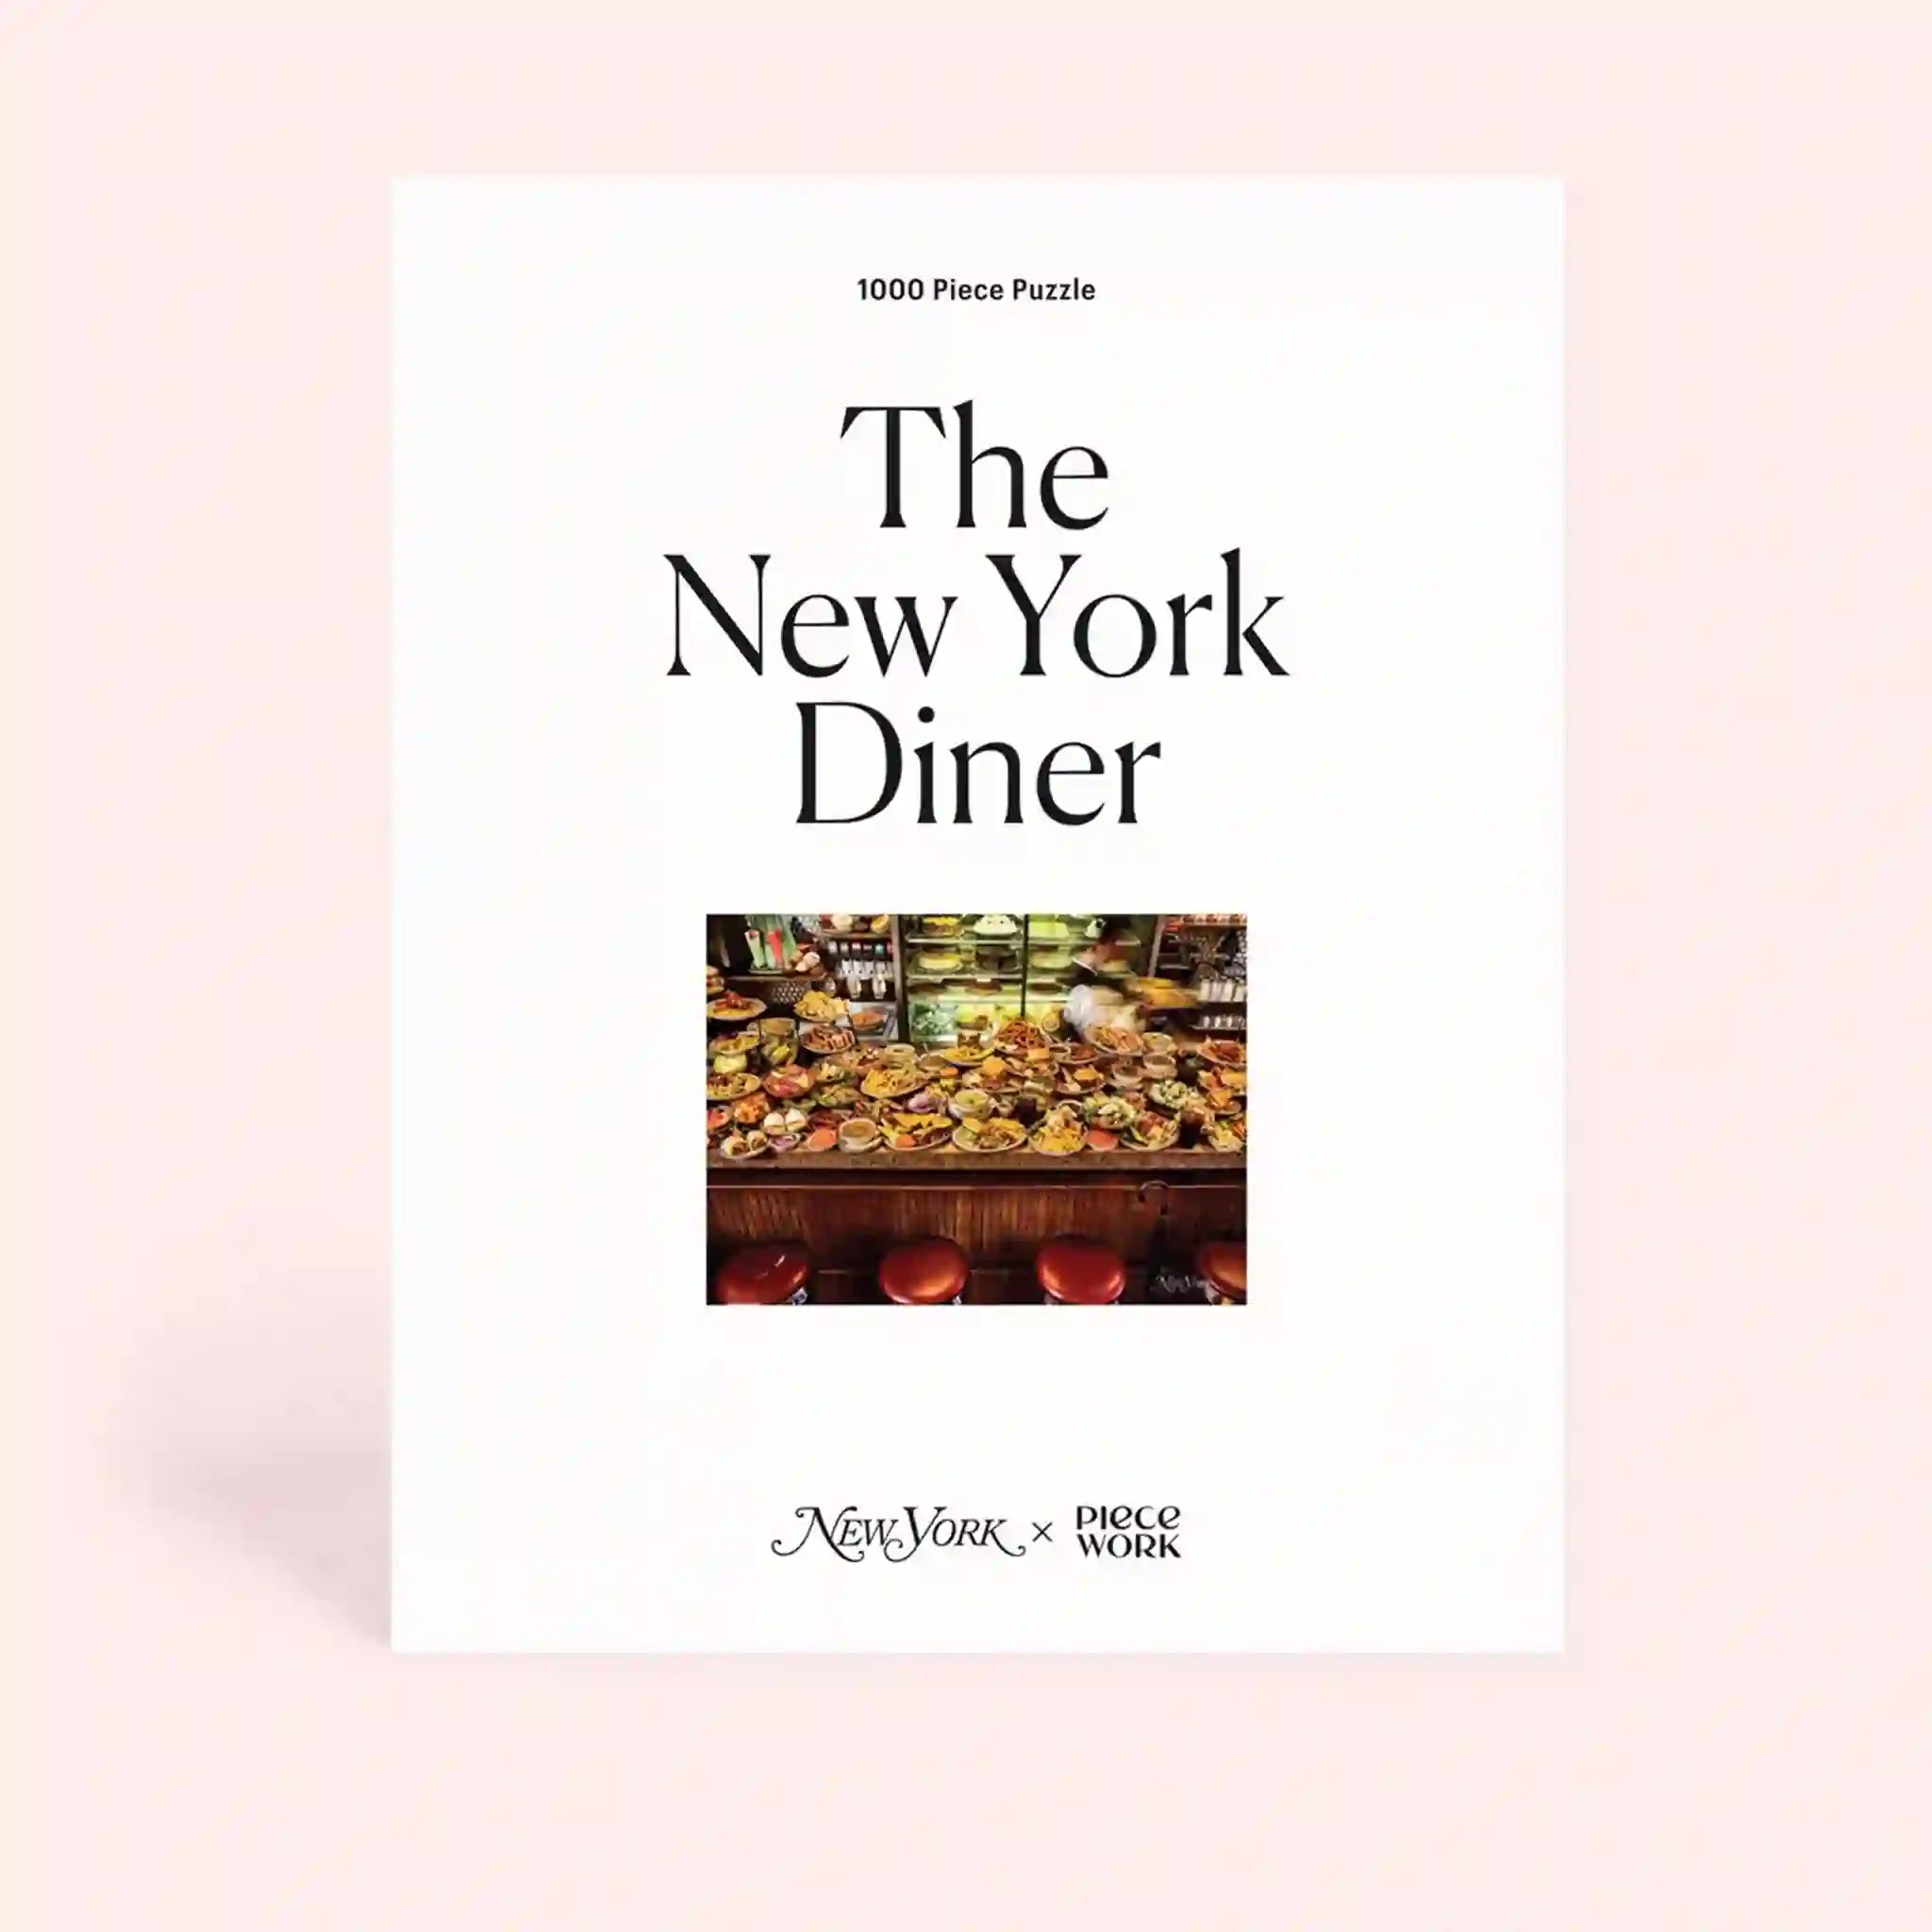 On a pink background is a white puzzle box with black text that reads, "The New York Diner" along with an image of diner food and a bar.